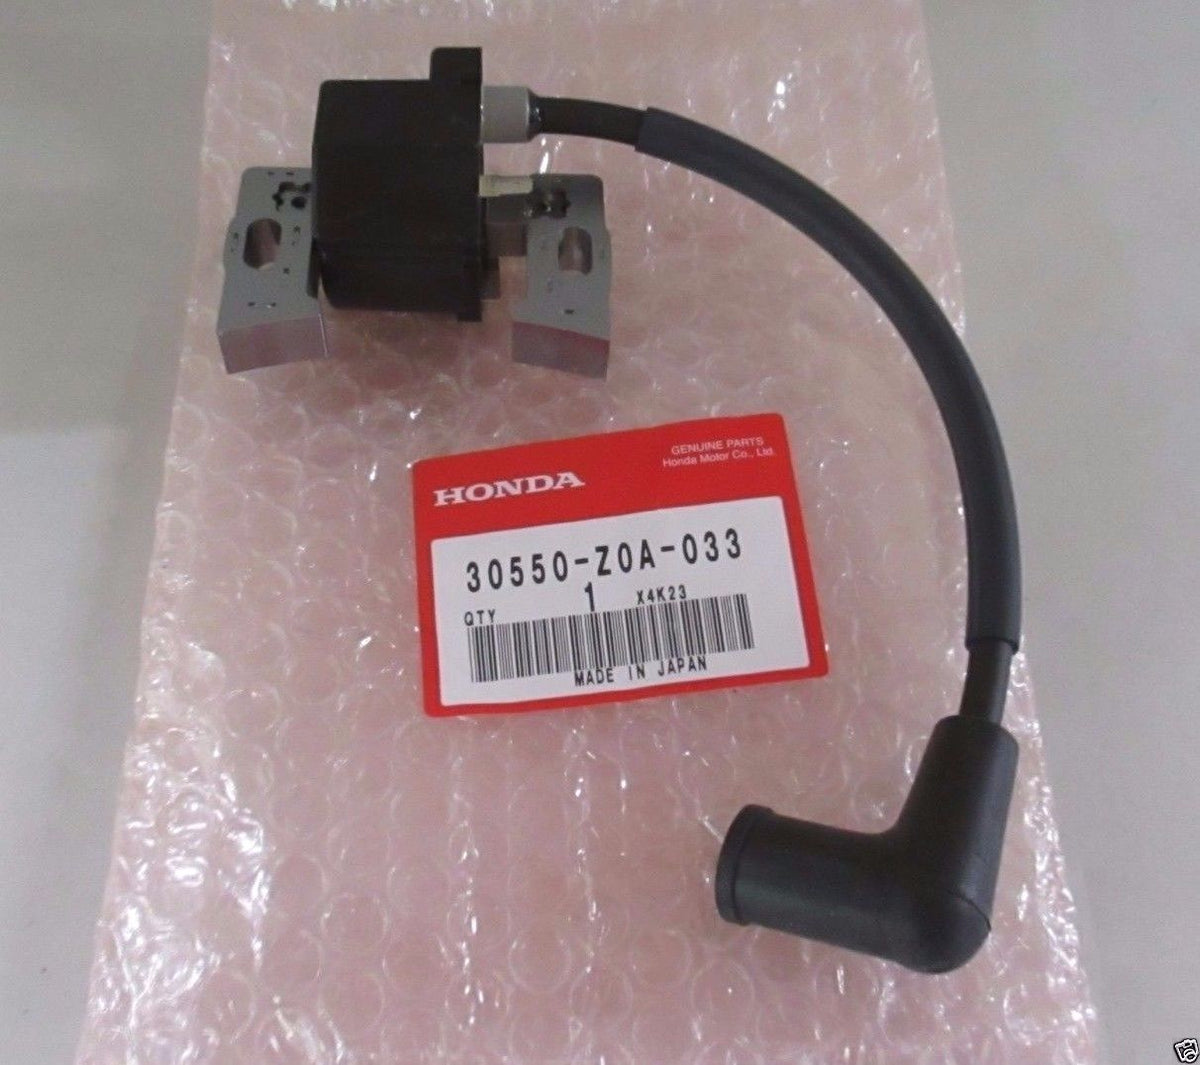 Genuine Honda 30550-Z0A-033 Ignition Coil #2 OEM — Powered By Moyer